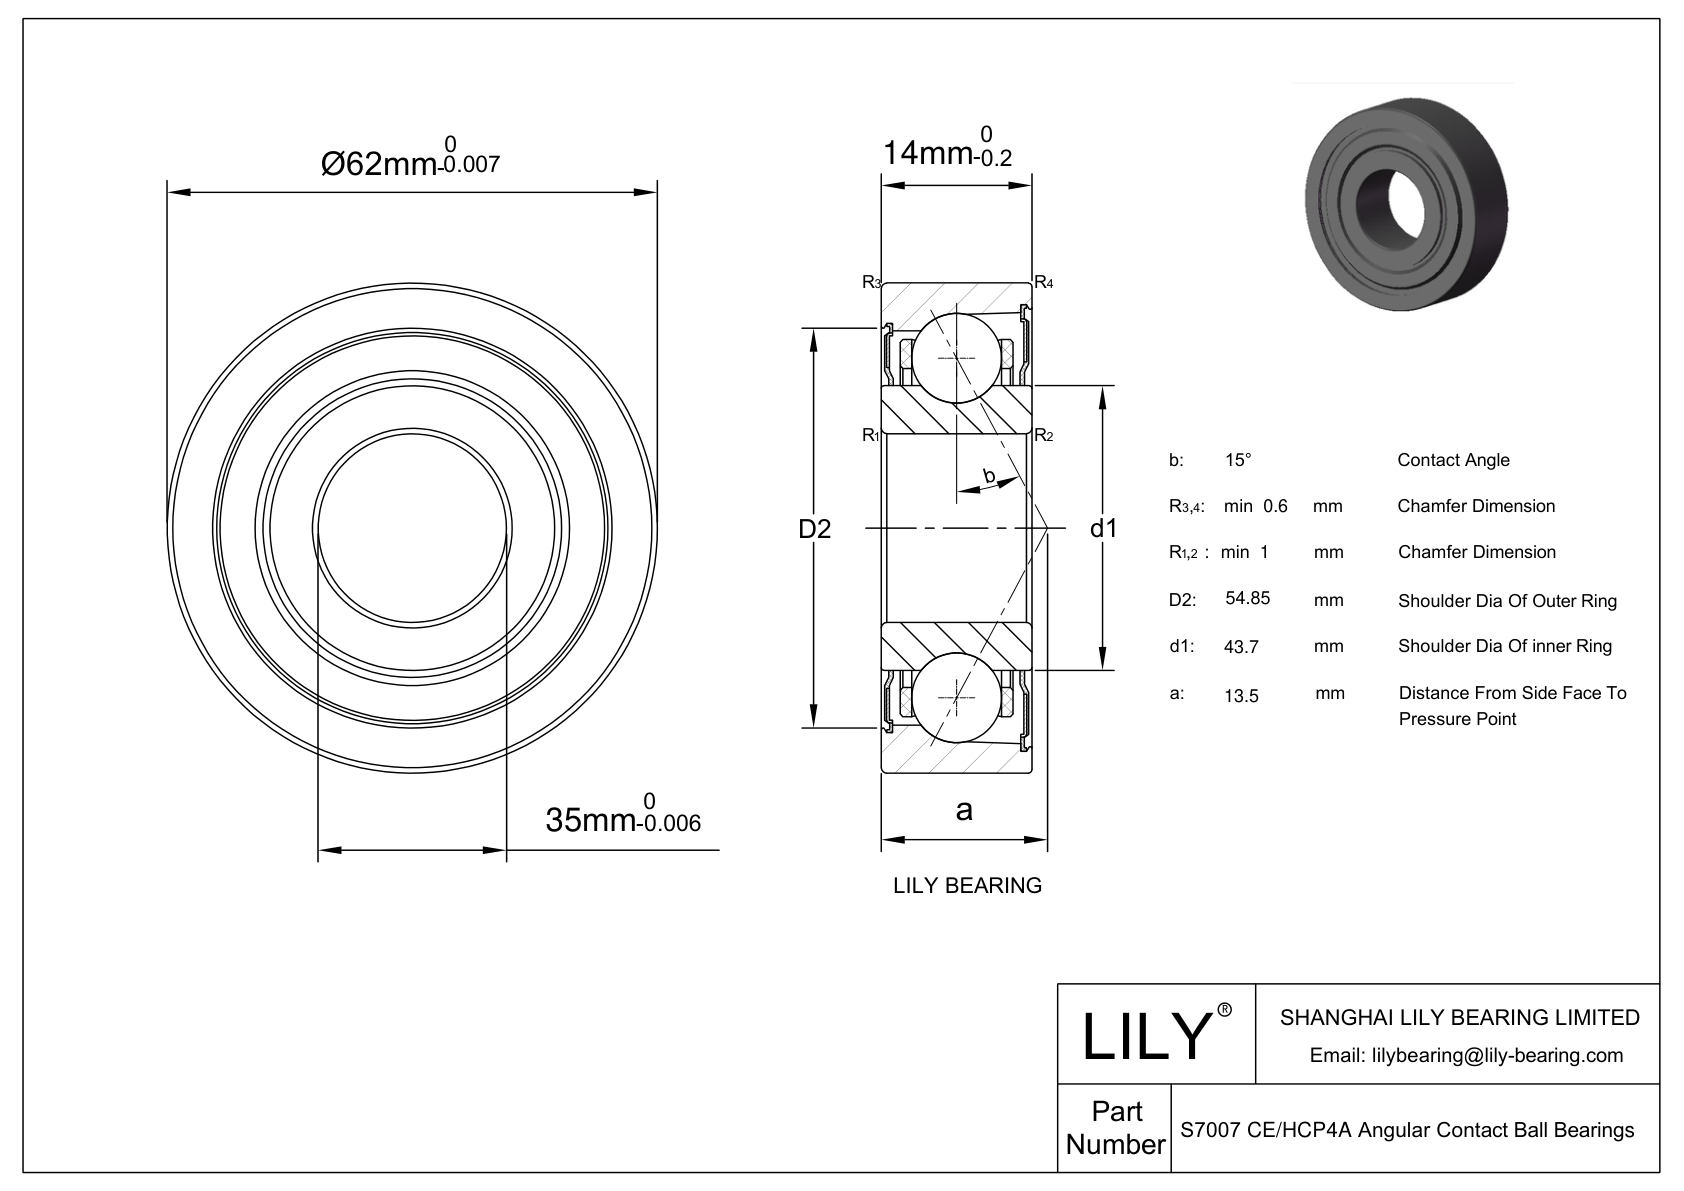 S7007 CE/HCP4A Super Precision Angular Contact Ball Bearings cad drawing